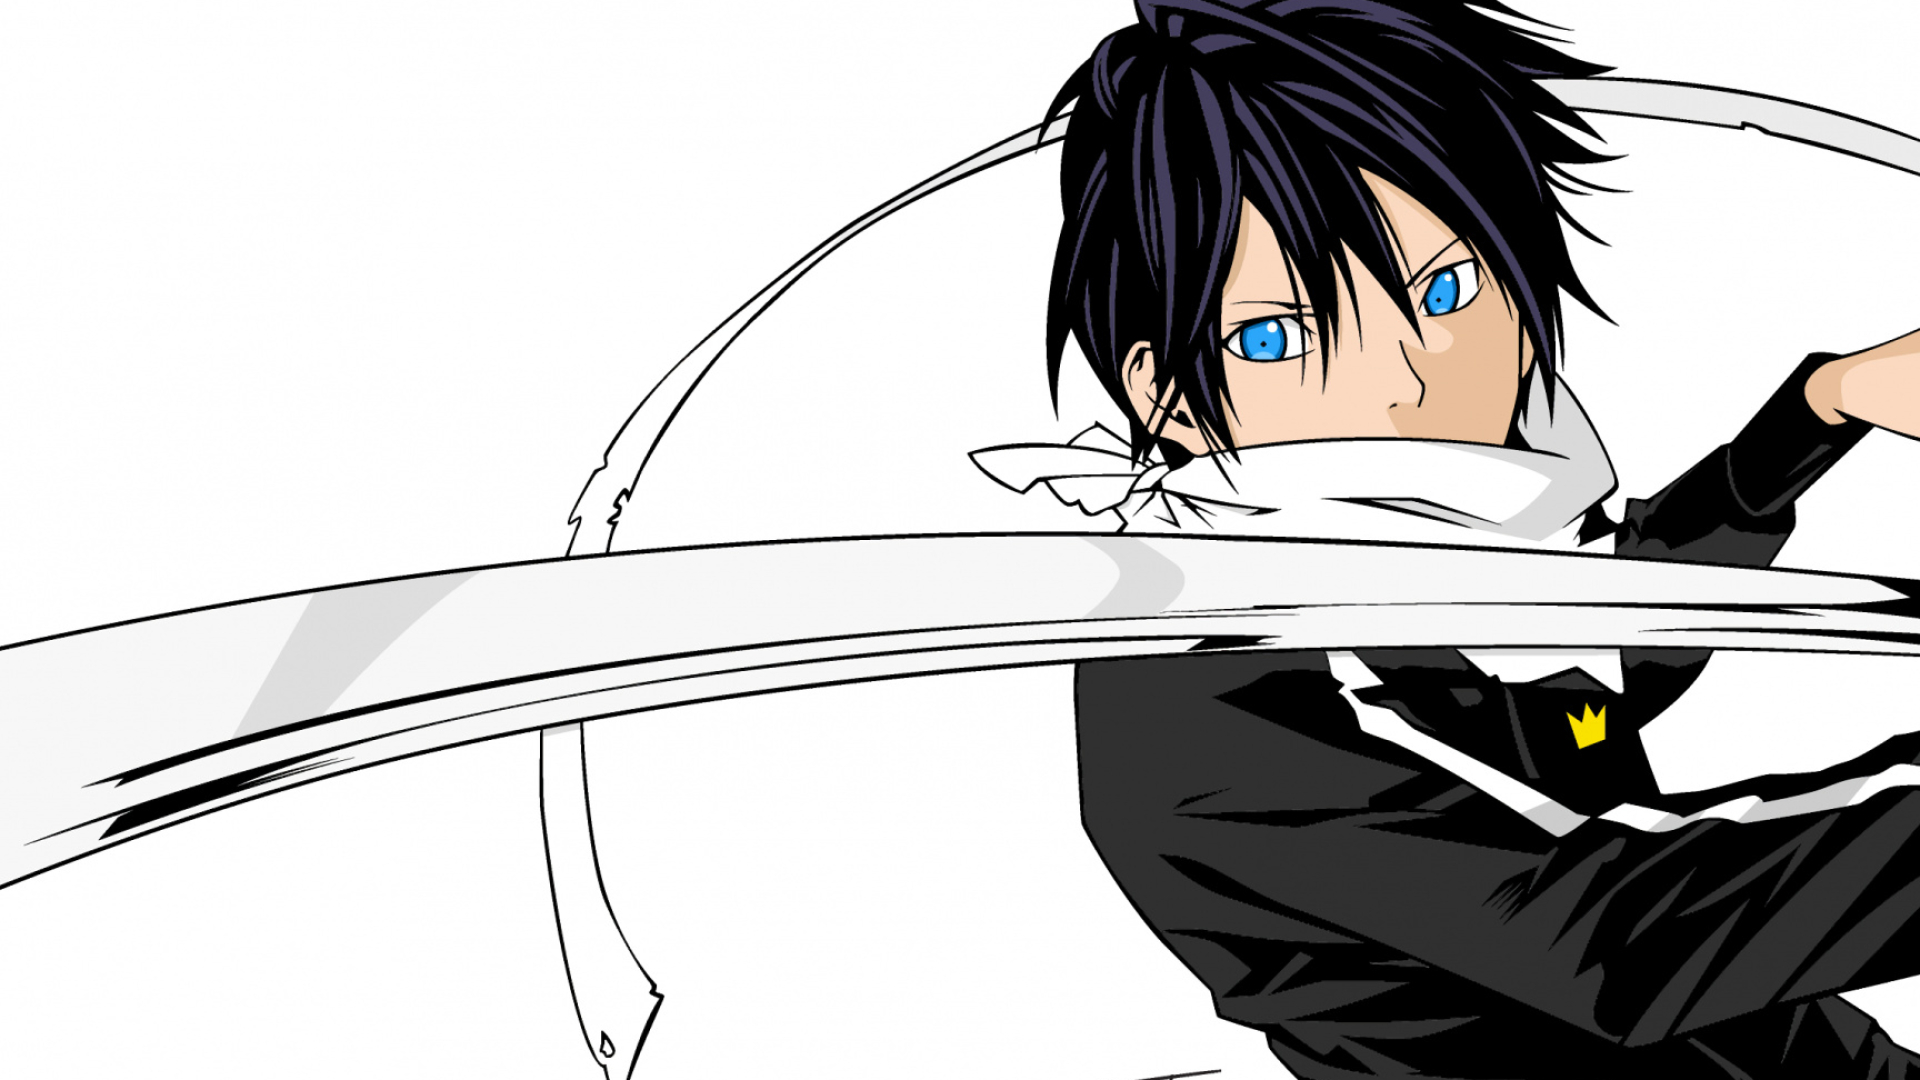 Noragami anime, Yato, HD image, Picture background, 1920x1080 Full HD Desktop